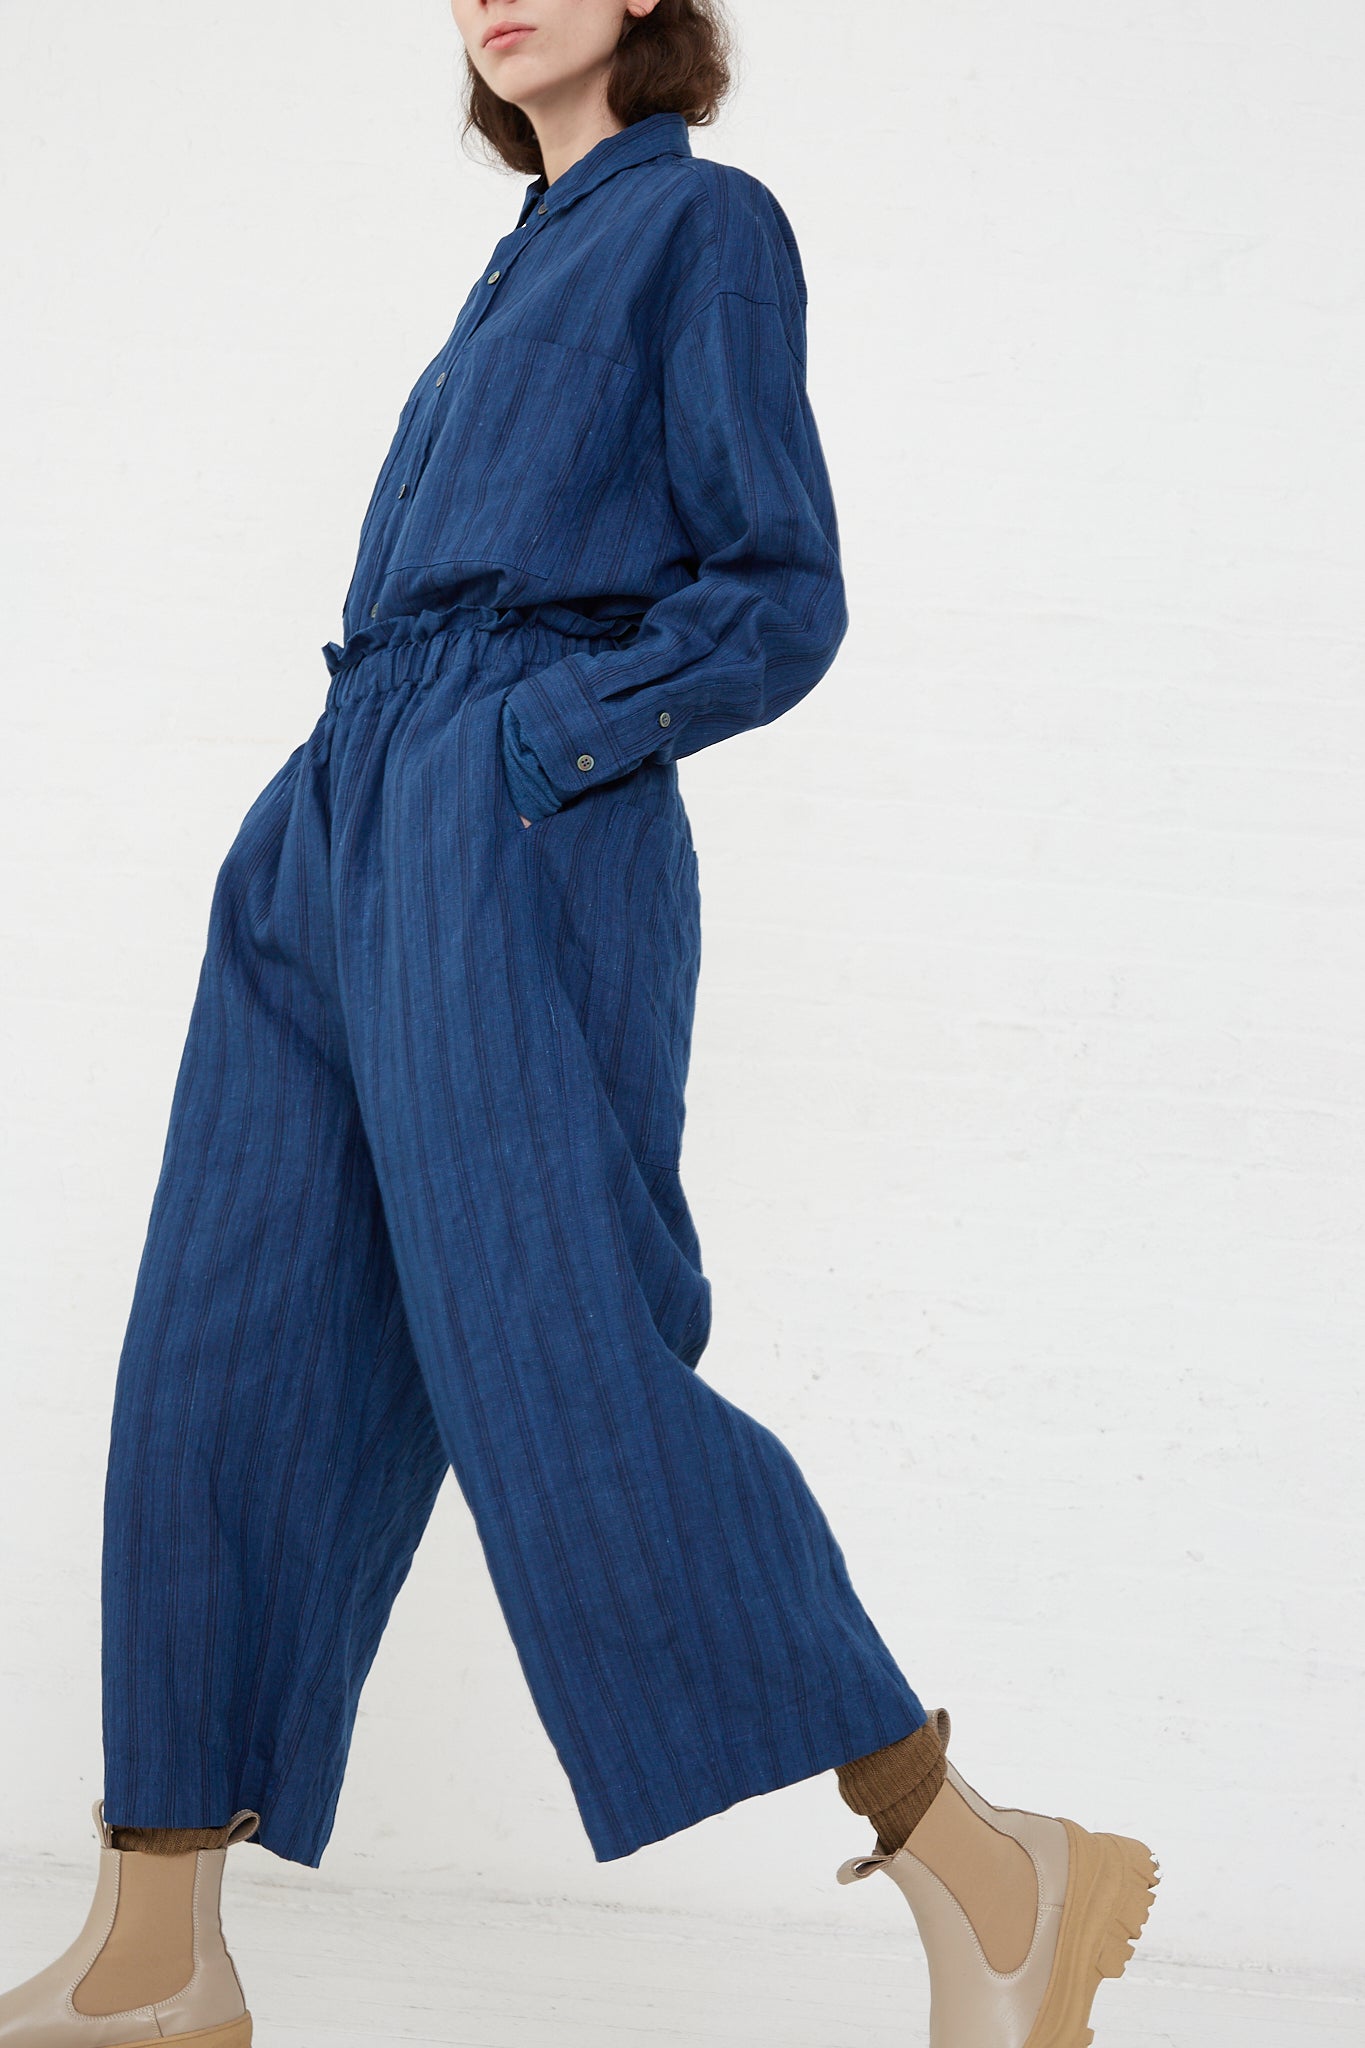 A woman wearing the Ichi Antiquités Woven Linen Pant in Indigo Stripes jumpsuit and boots, featuring an elasticated waist for comfort.